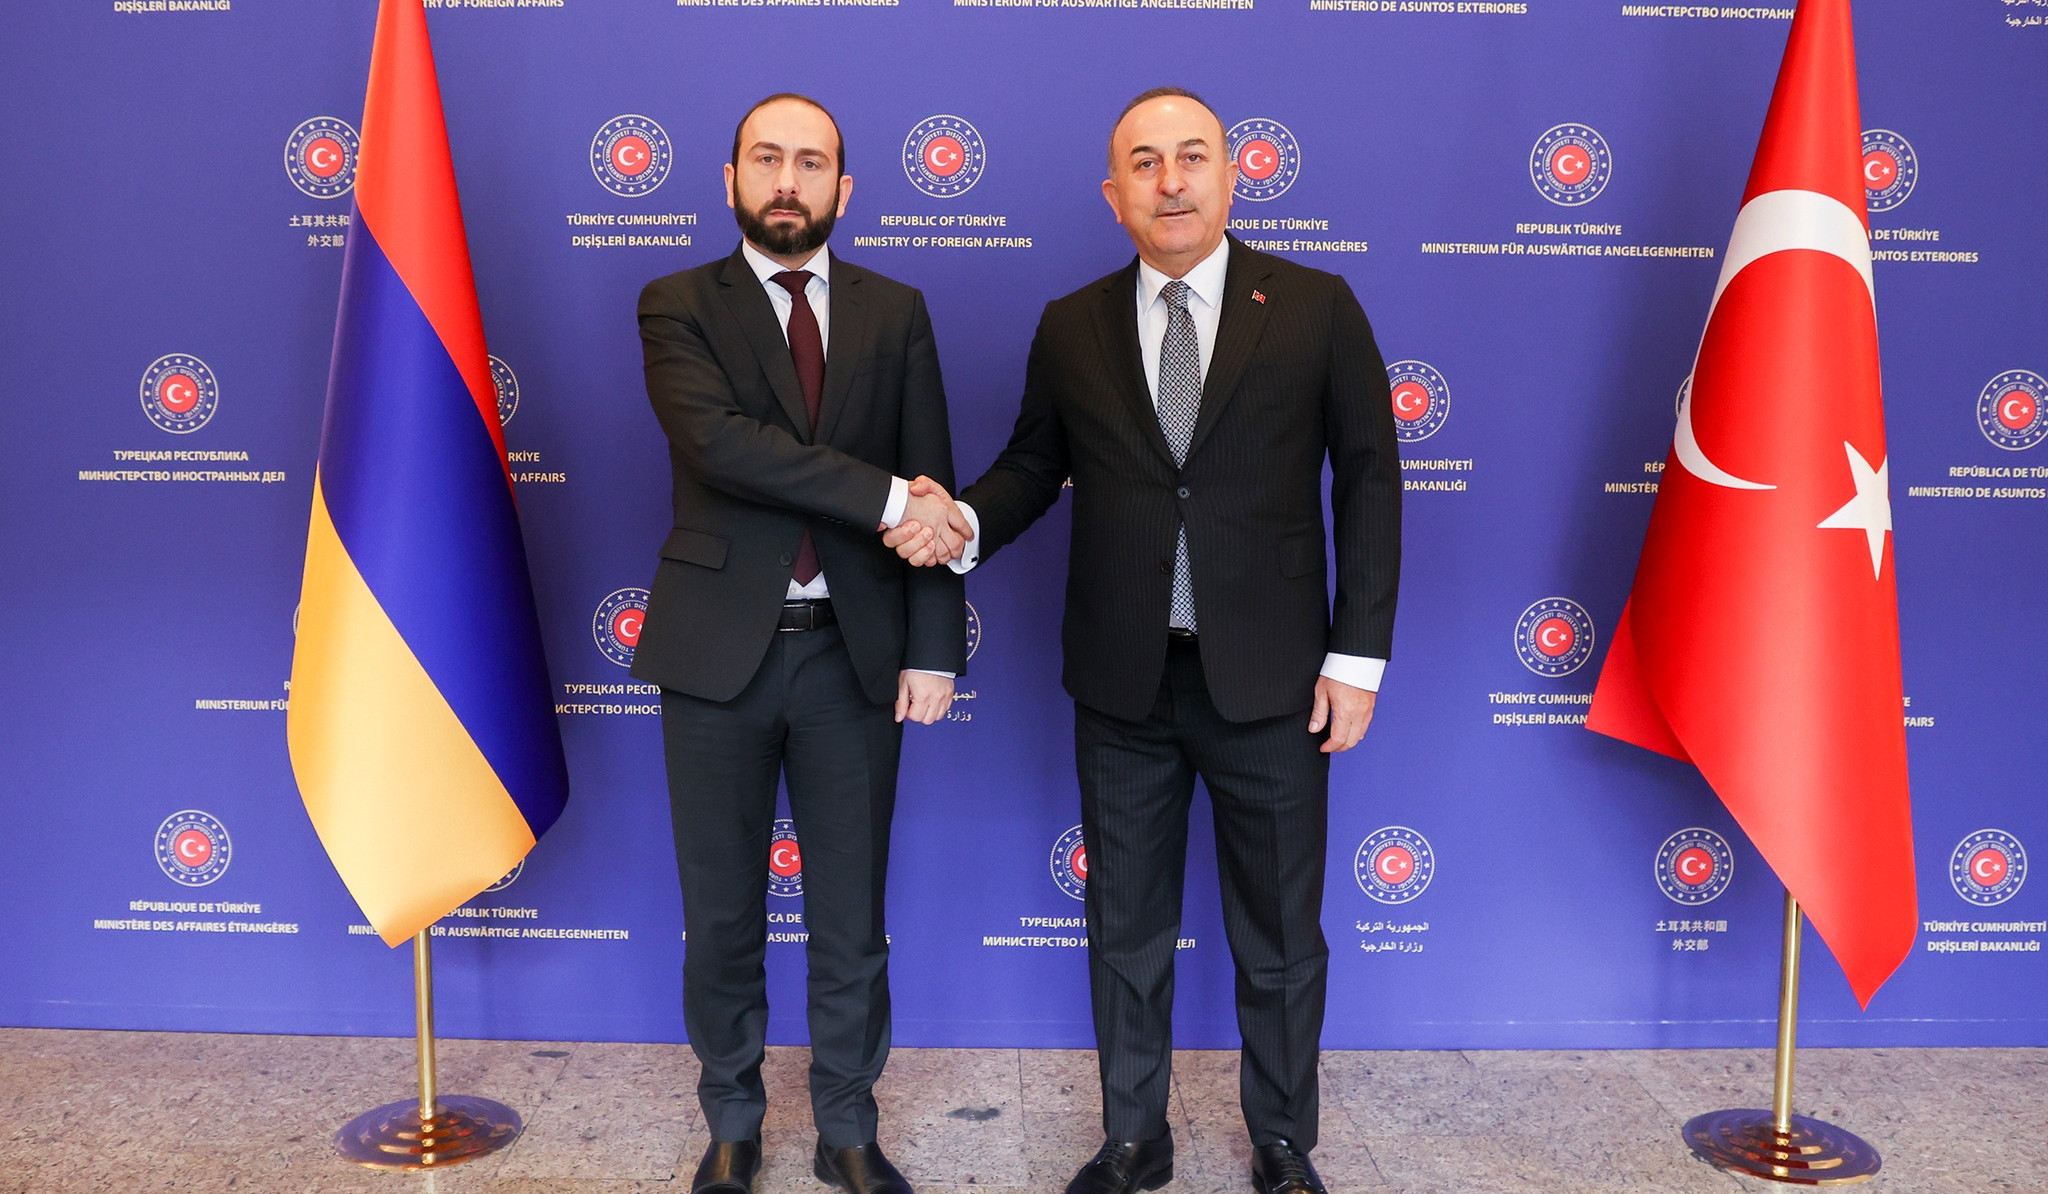 It is very meaningful that Armenian-Turkish land border, which is closed for over 30 years, was opened for Armenian humanitarian aid: Mirzoyan